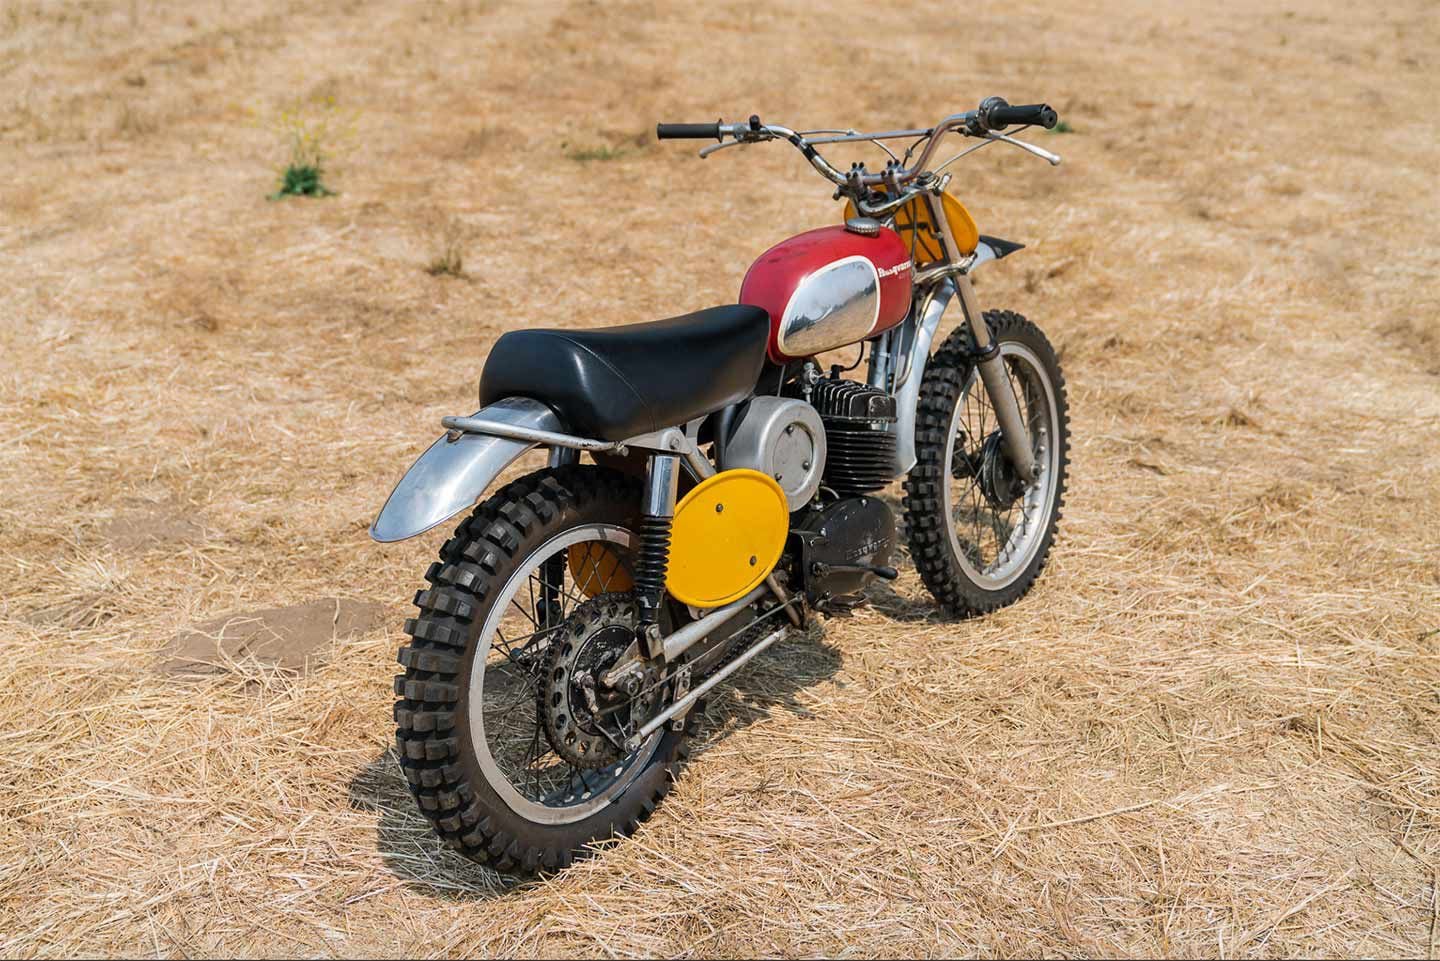 By all accounts, Steve McQueen was an accomplished rider. But in more professional hands, the 1970 Husqvarna 400 Cross won two 500cc world championships and countless races.